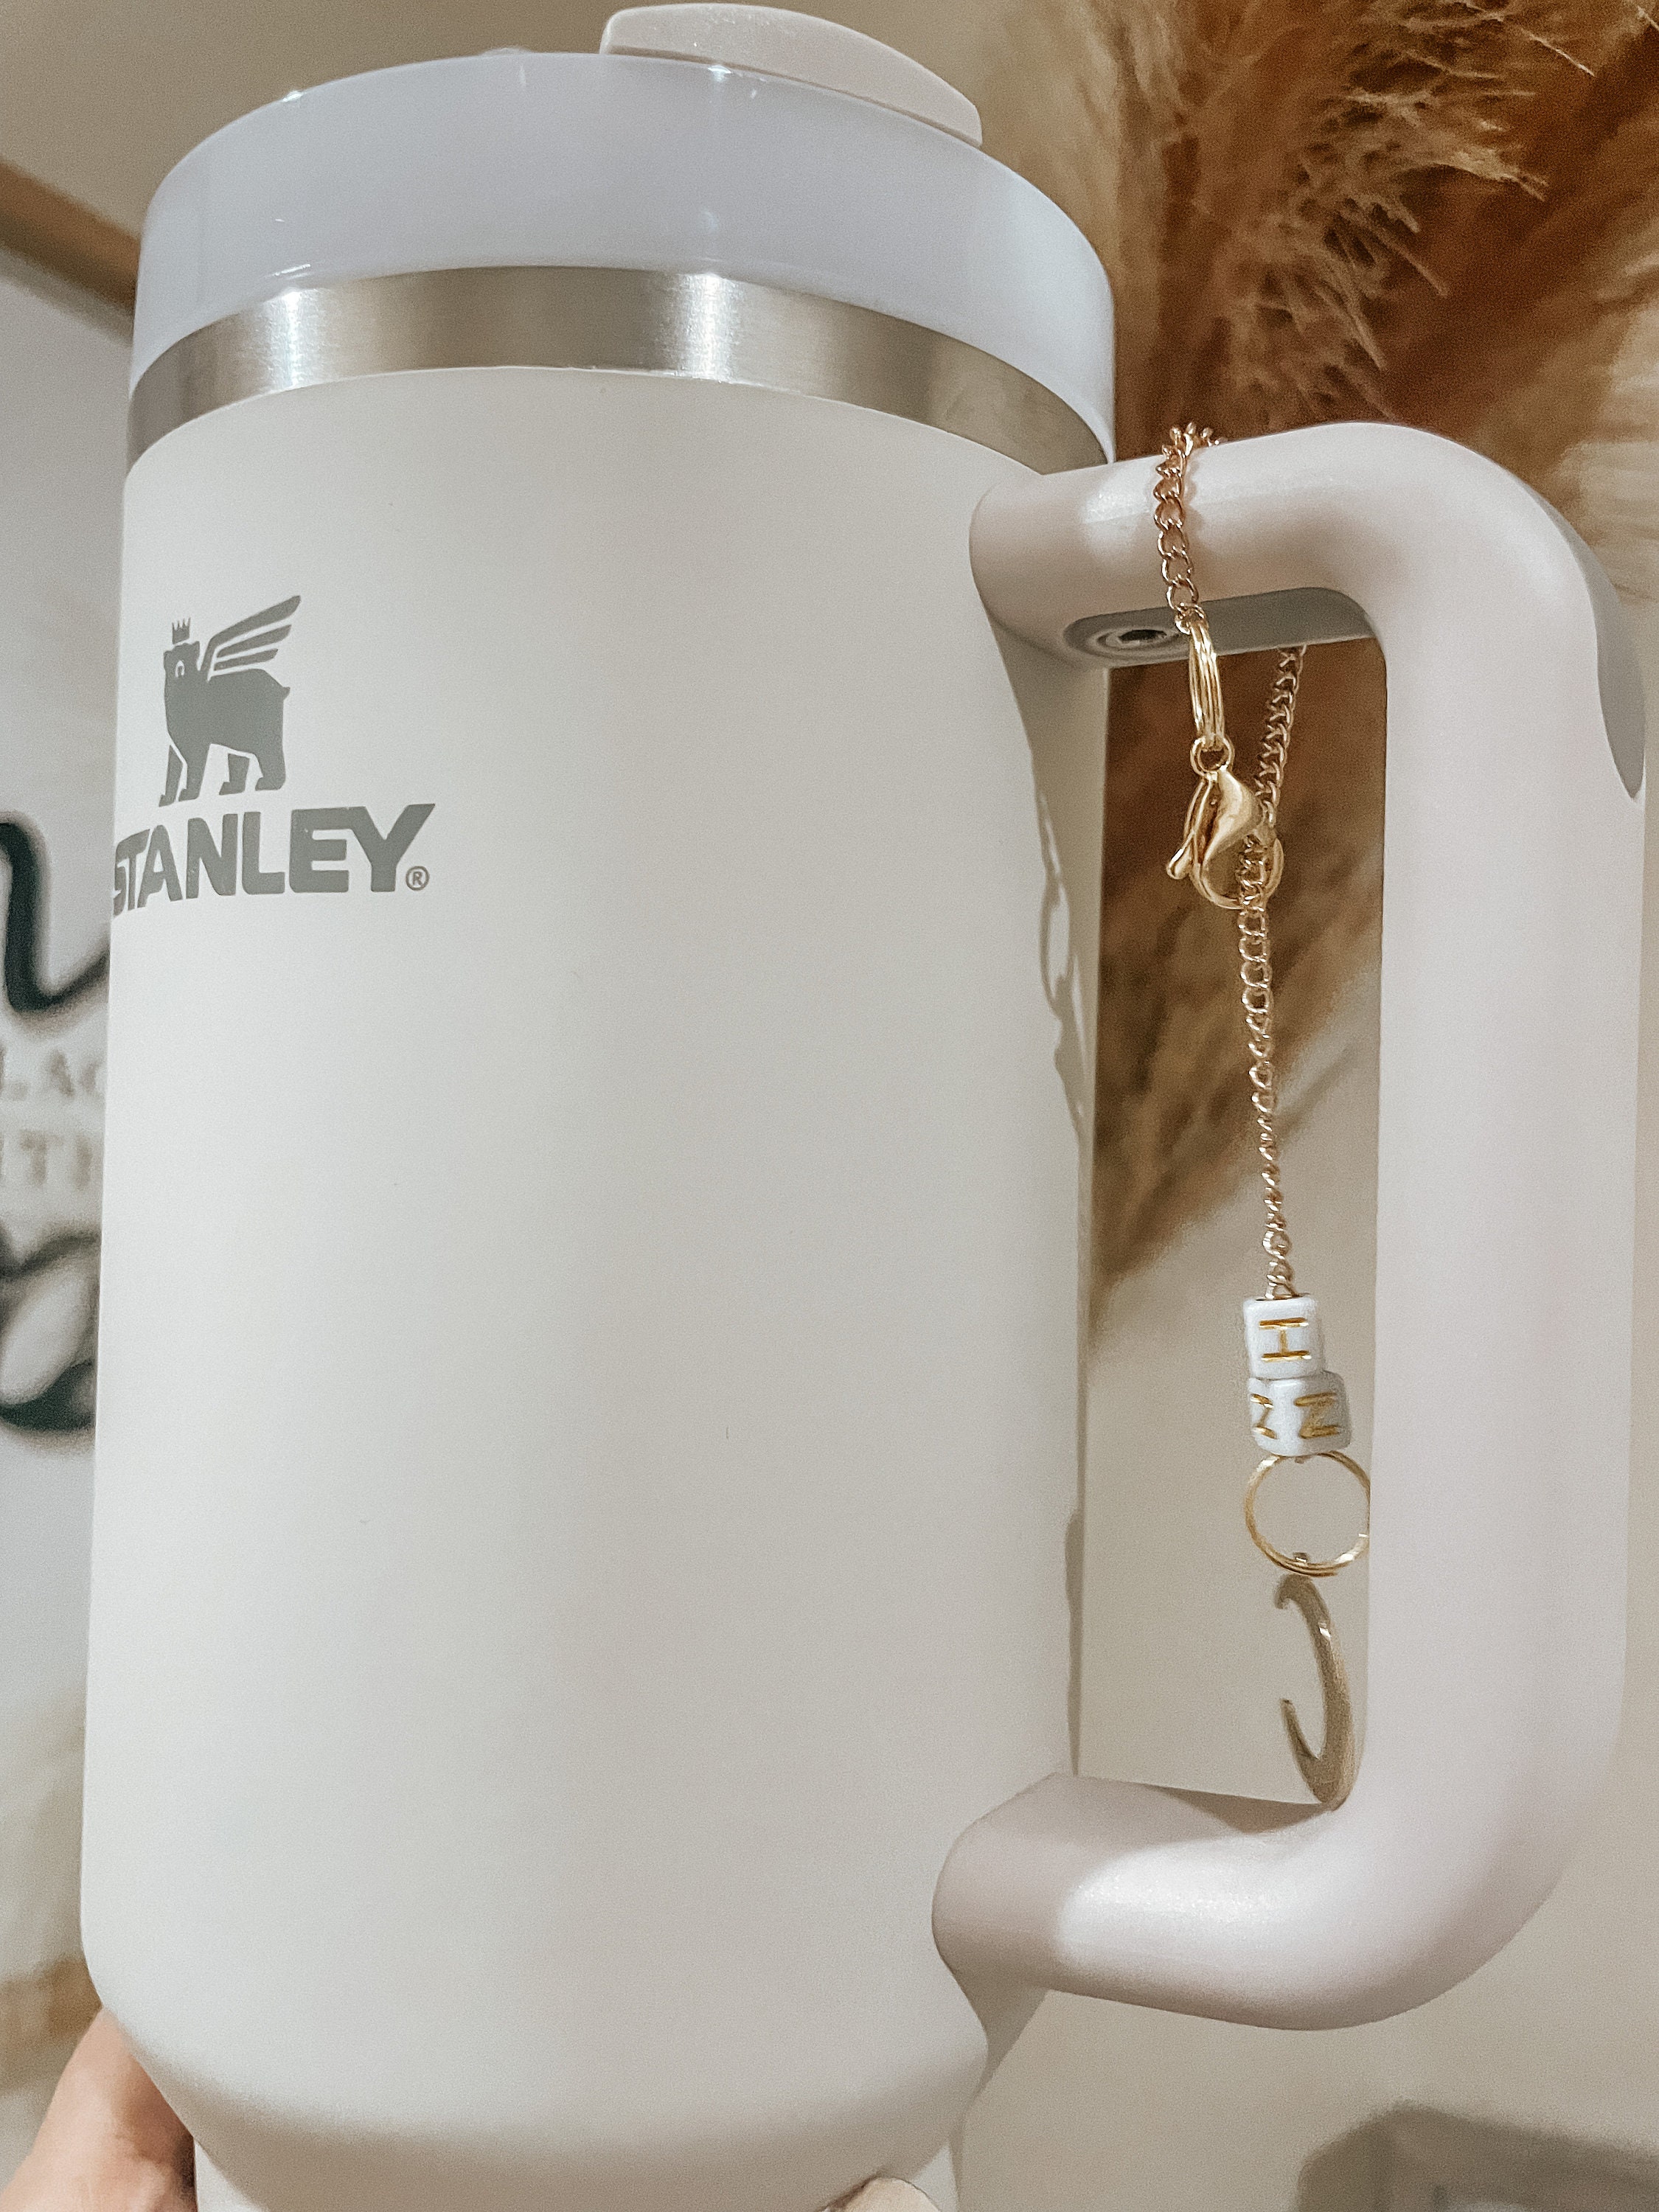 Stanley Tumbler Cup Moon Charm Accessories for Water Bottle Stanley Cup  Tumbler Handle Charm Stanley Accessories Water Bottle Charm -  Finland